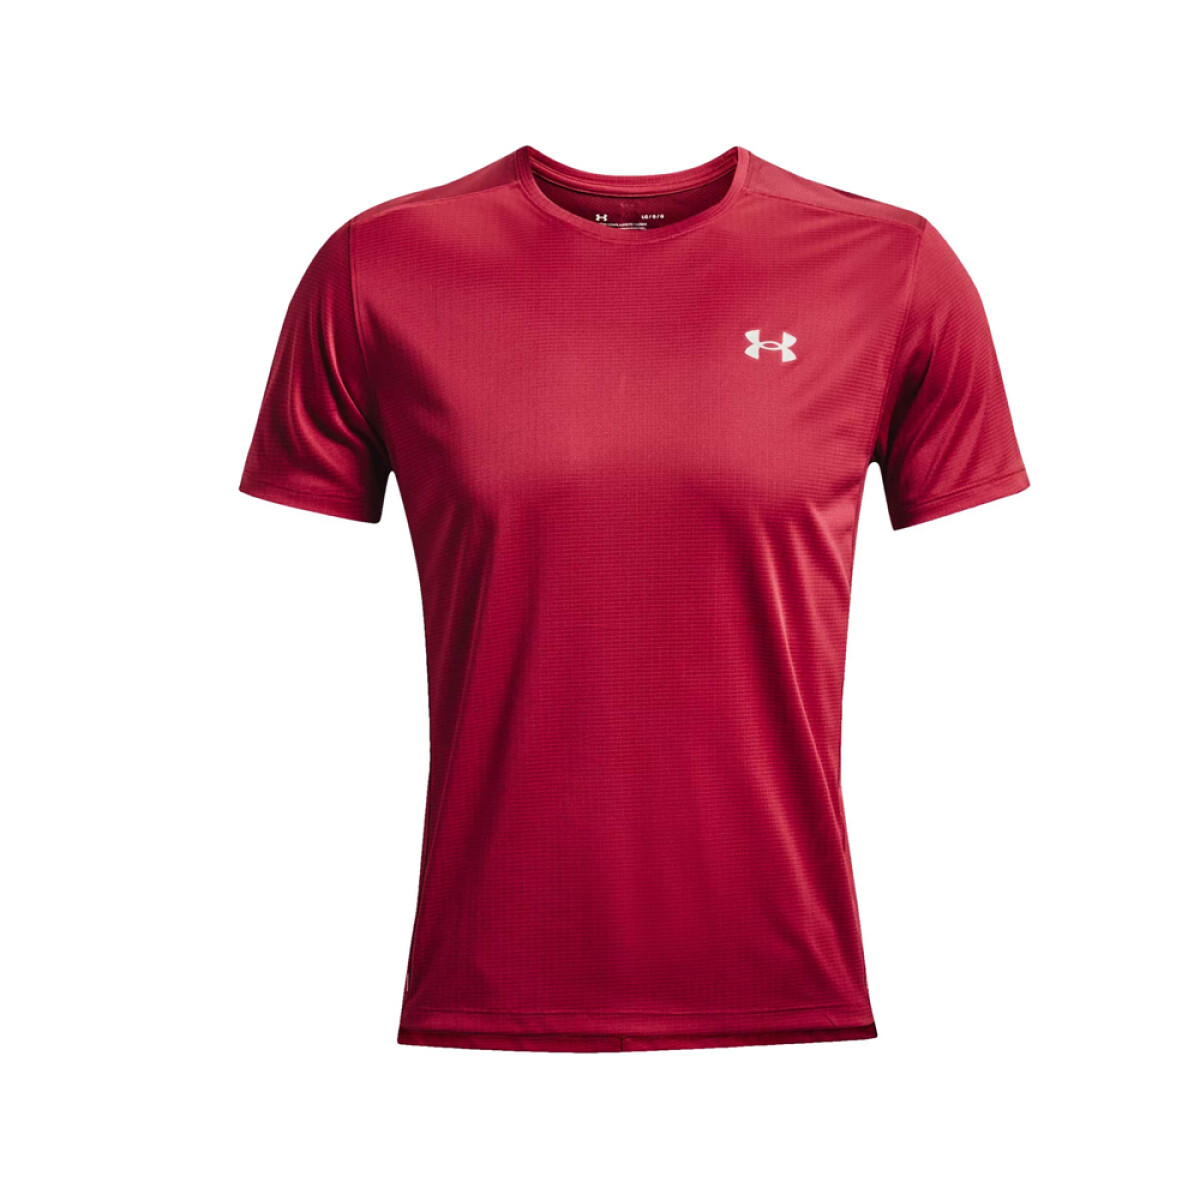 REMERA UNDER ARMOUR SOEED STRIDE 2.0 - Bordeaux 